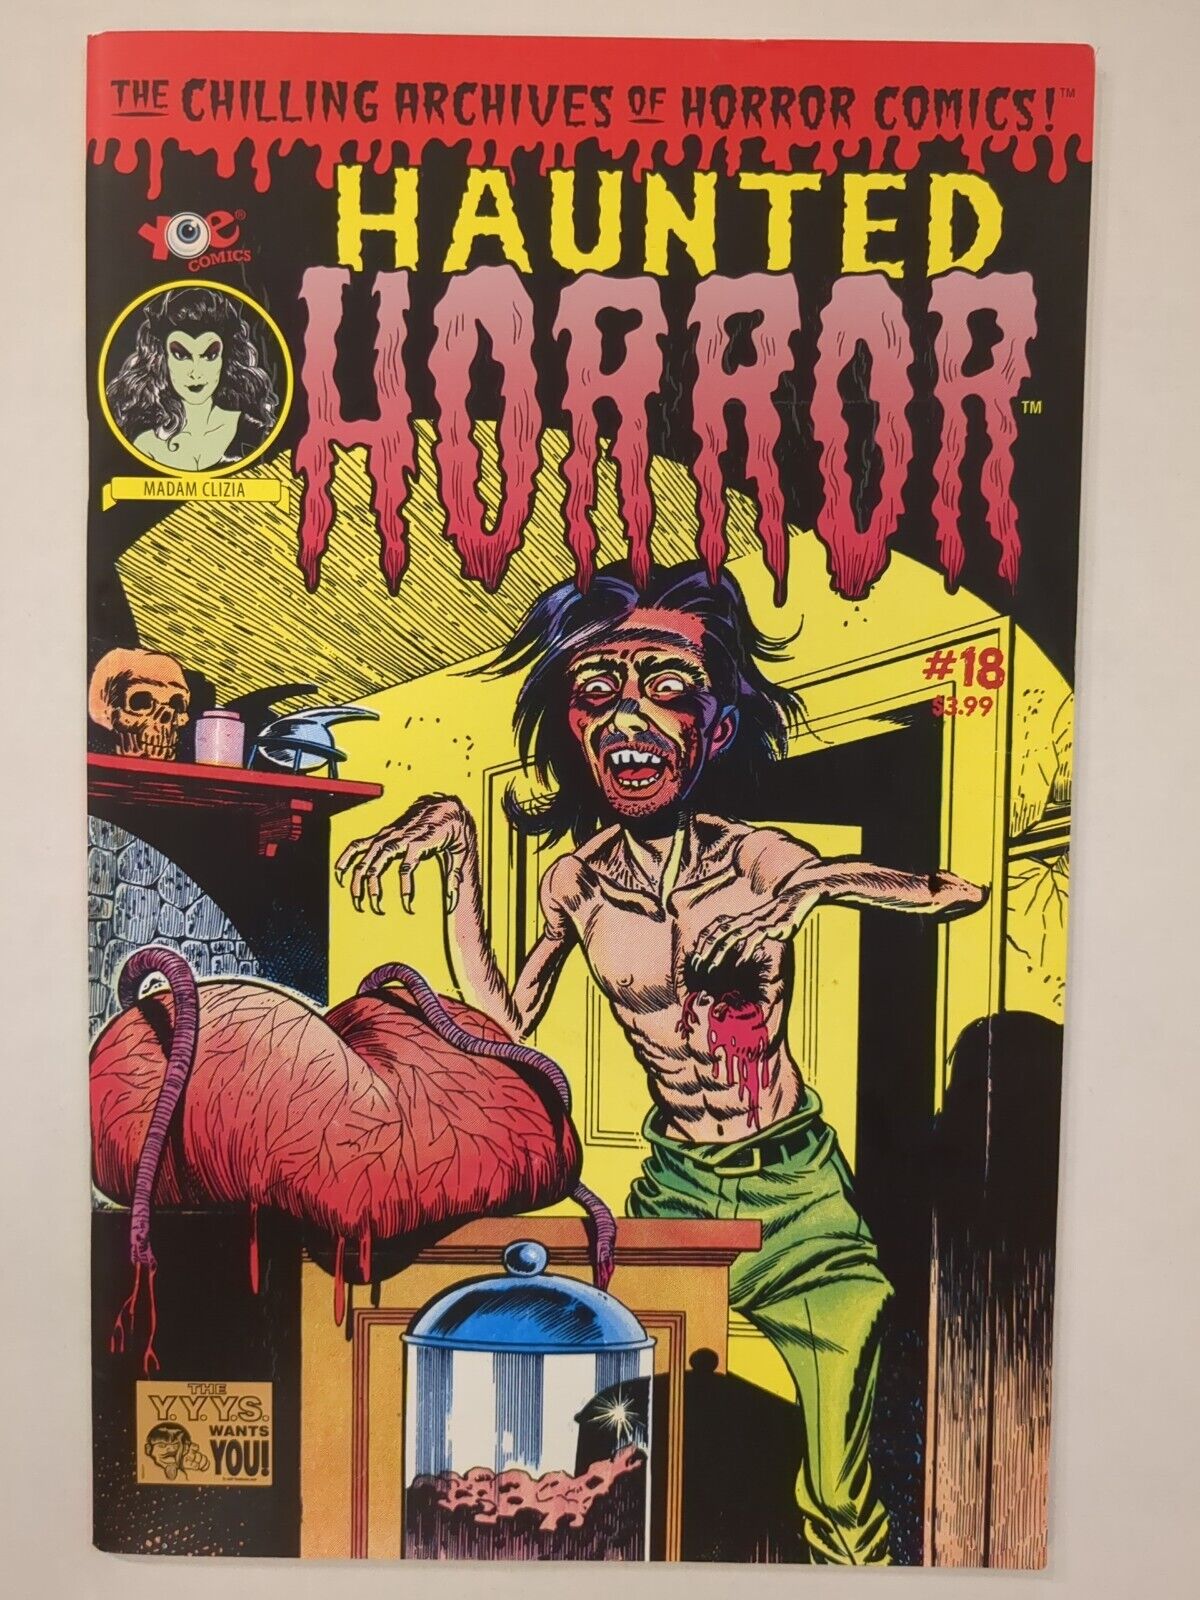 Haunted Horror #18, First Printing, IDW, July 2015